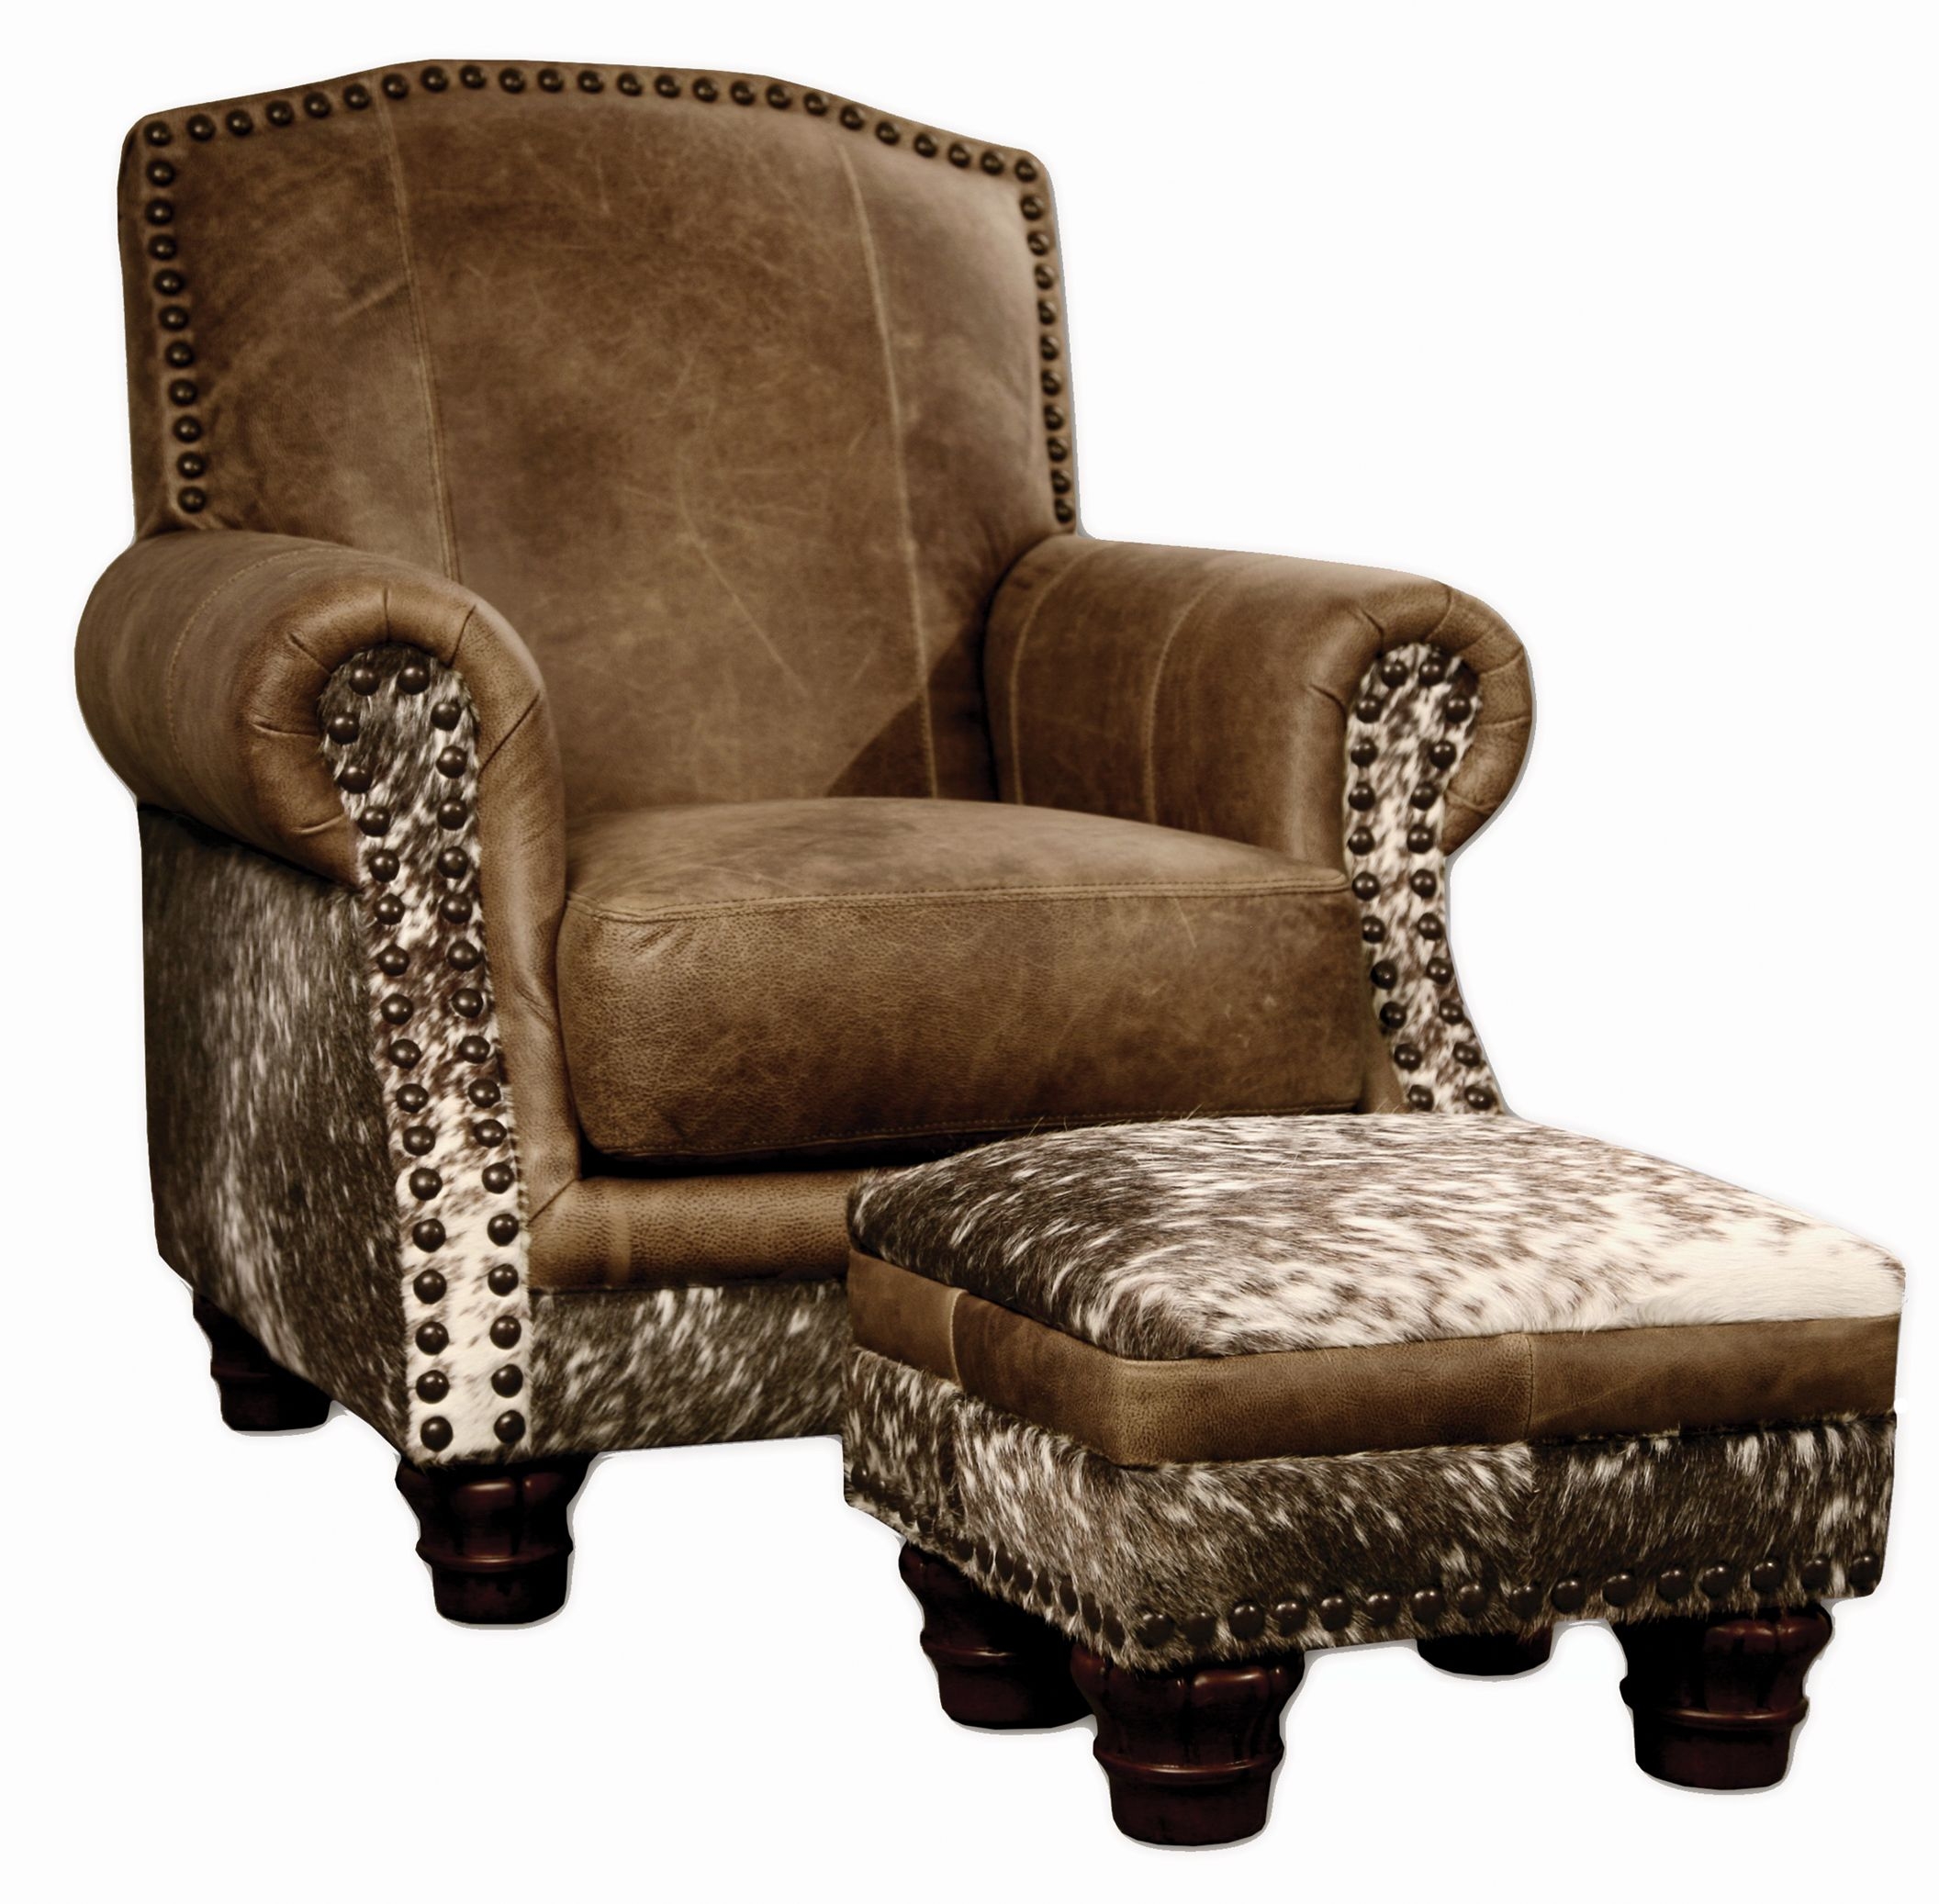 Western style leather chairs